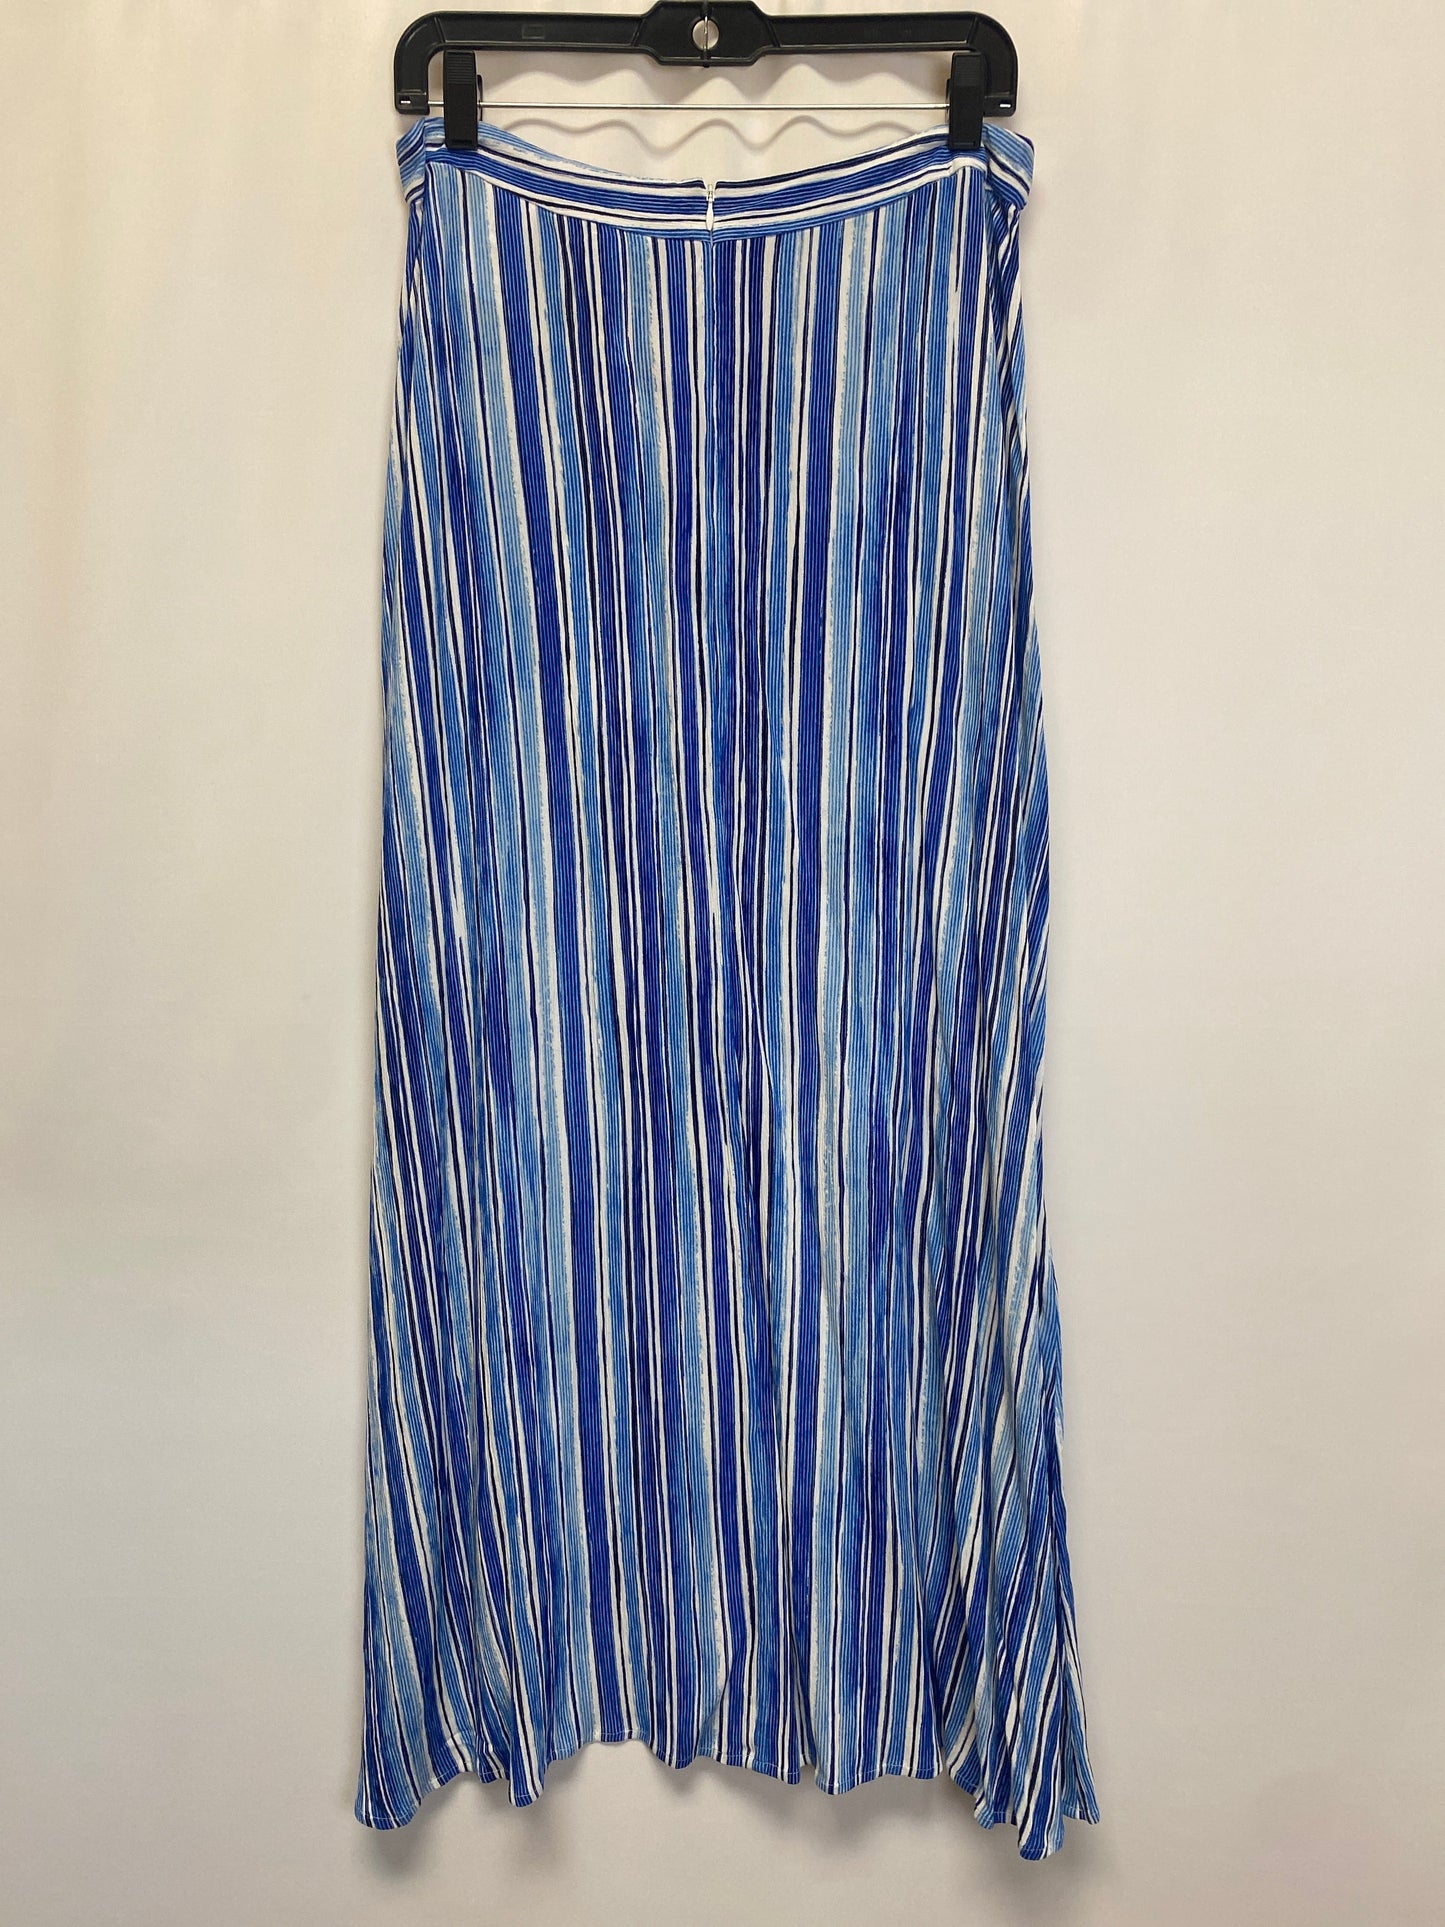 Skirt Maxi By Tommy Bahama  Size: 8